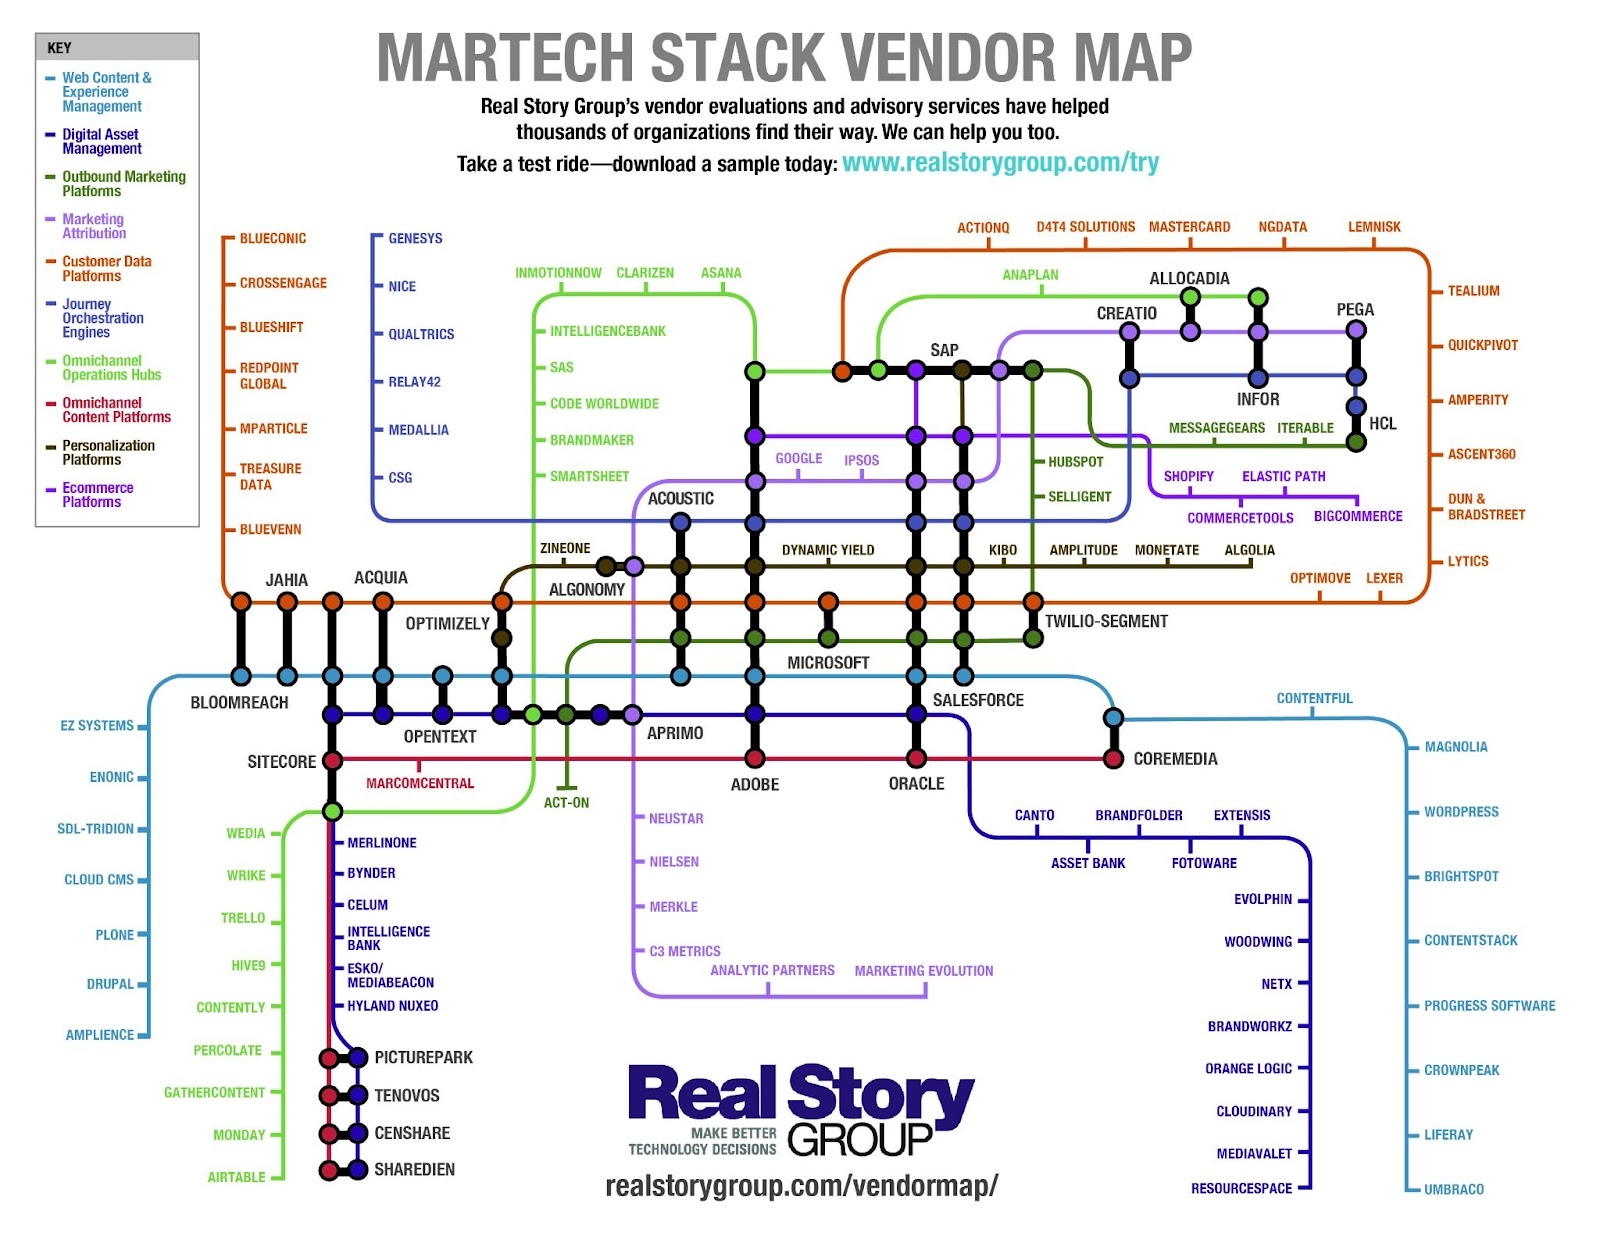 5 enduring trends in martech